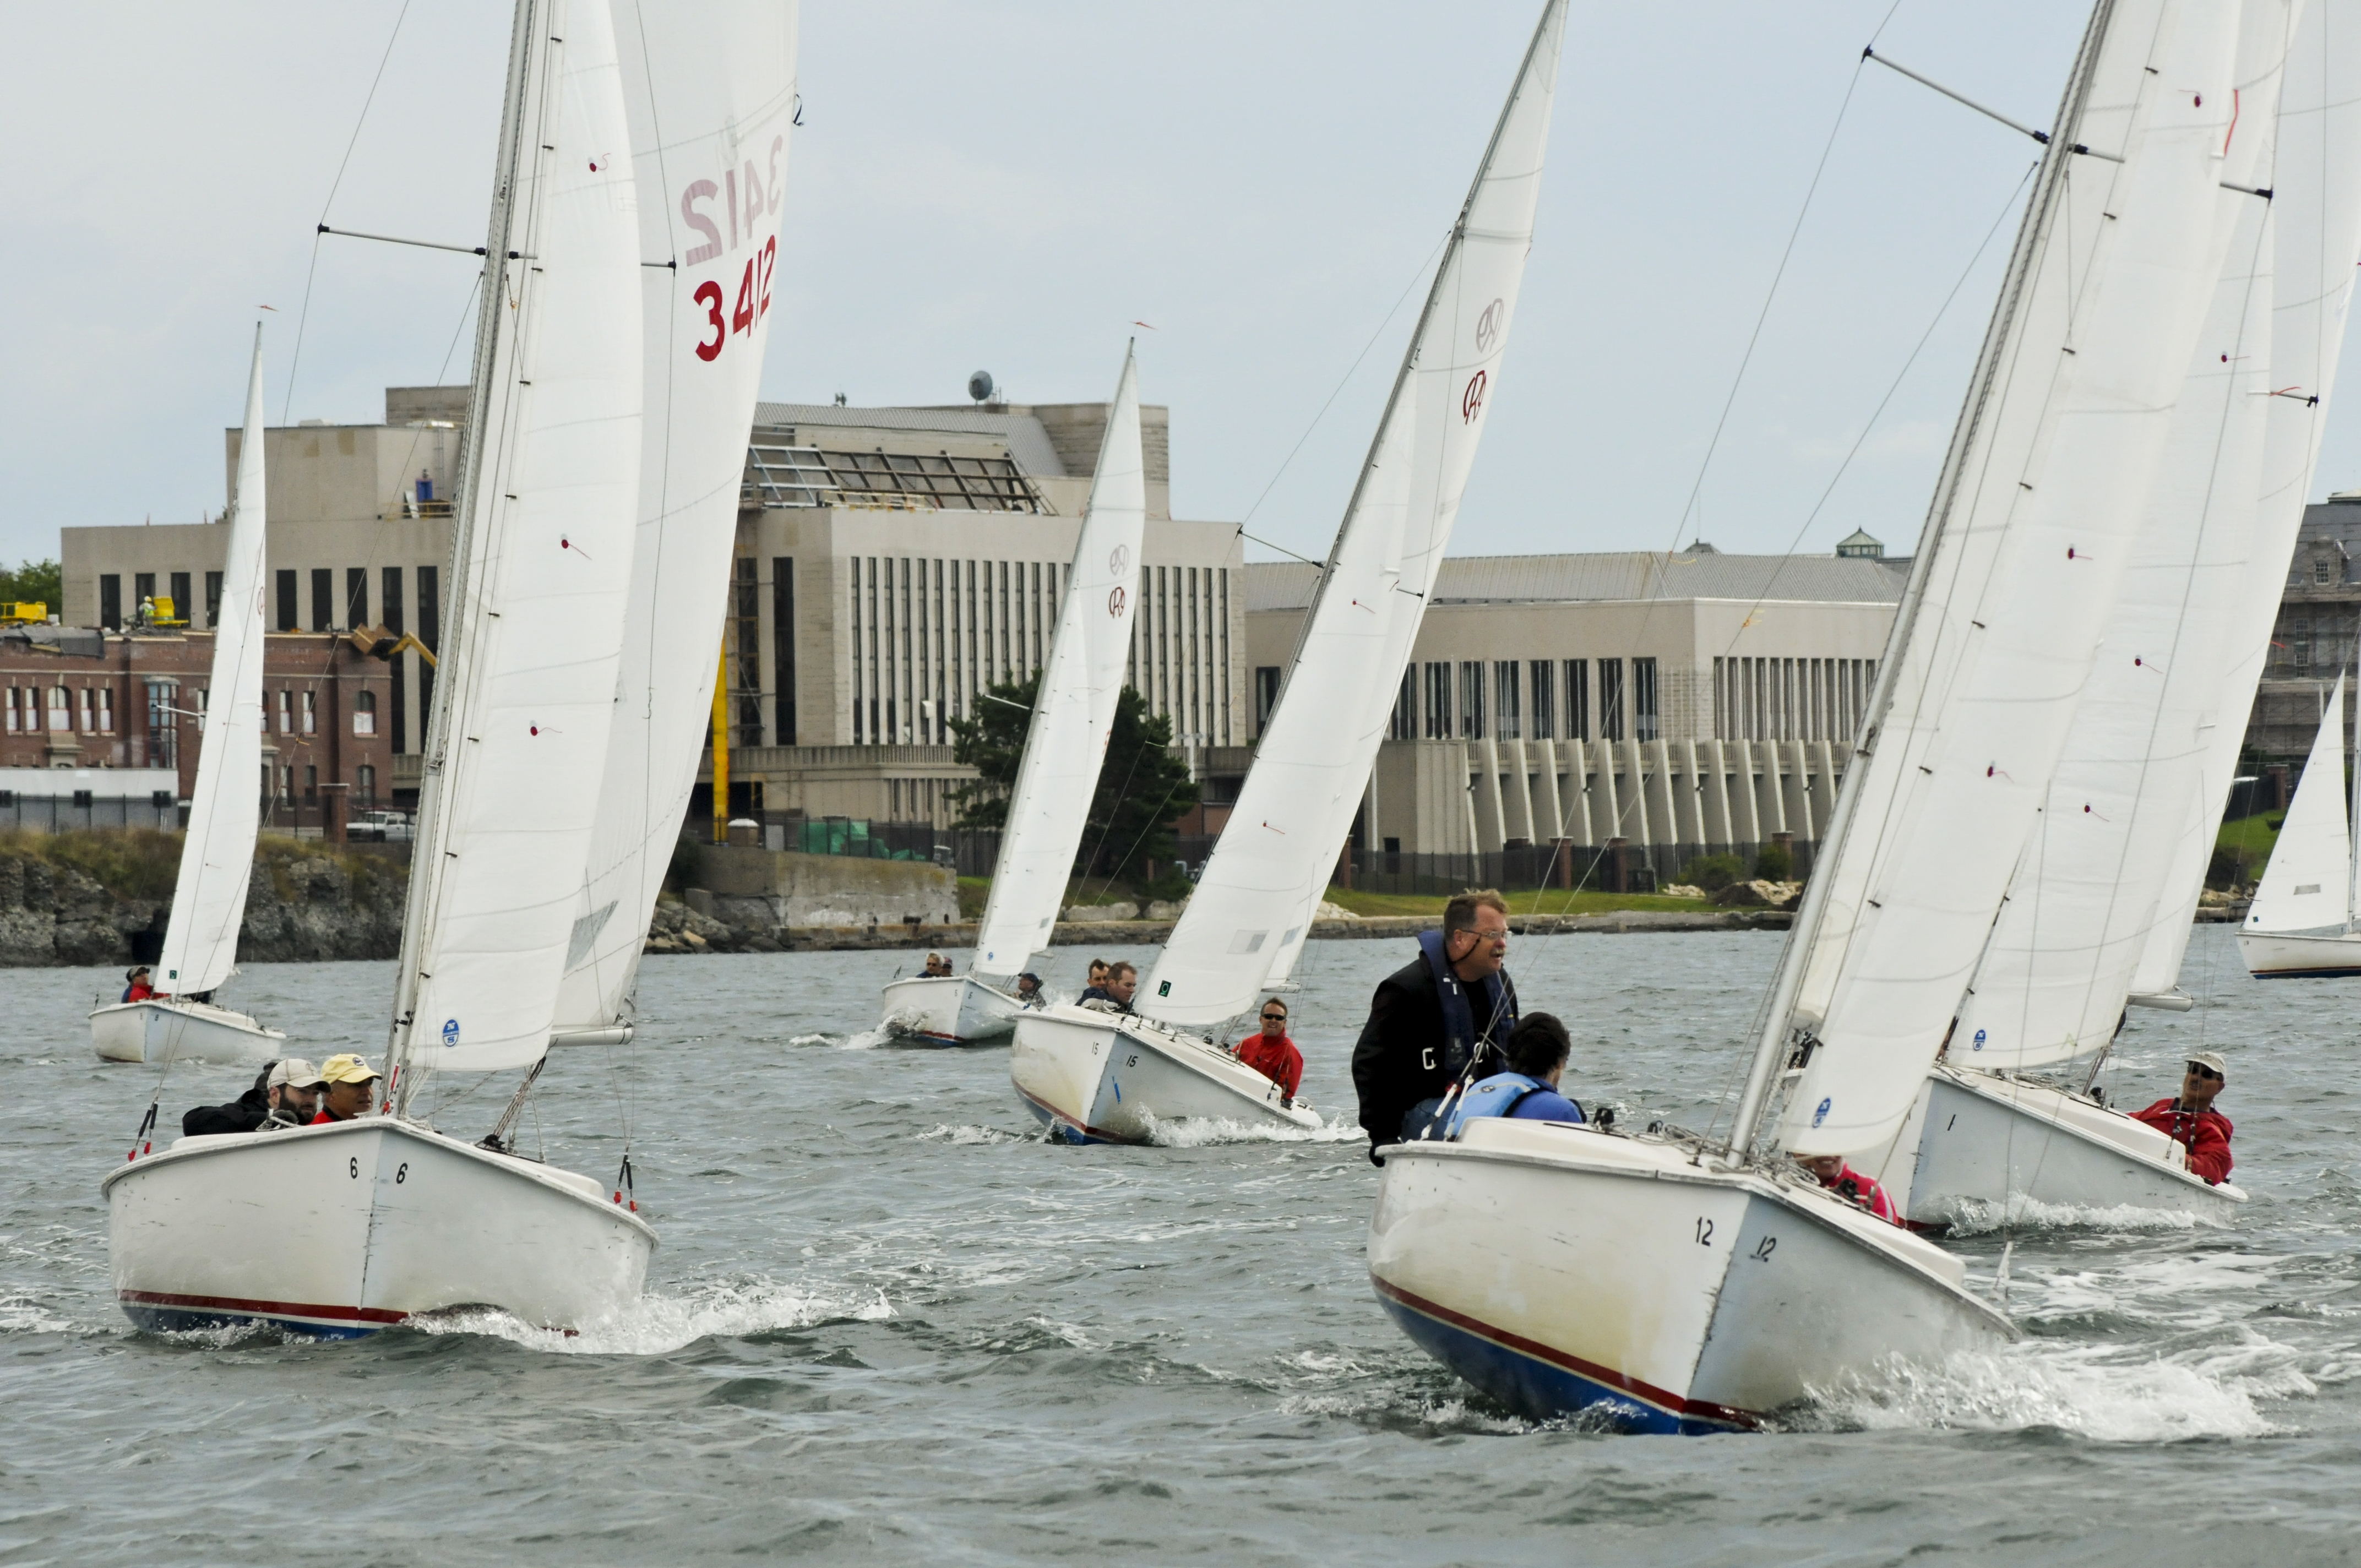 NEWPORT, R.I. (Sept. 21, 2012) Racers from the U.S. Naval War College (NWC) sailing team compete in a race on Narragansett Bay. The race was part of the Presidents Cup, a series of sporting events for NWC students and faculty. (U.S. Navy photo by Mass Communication Specialist 1st Class Eric Dietrich/Released)